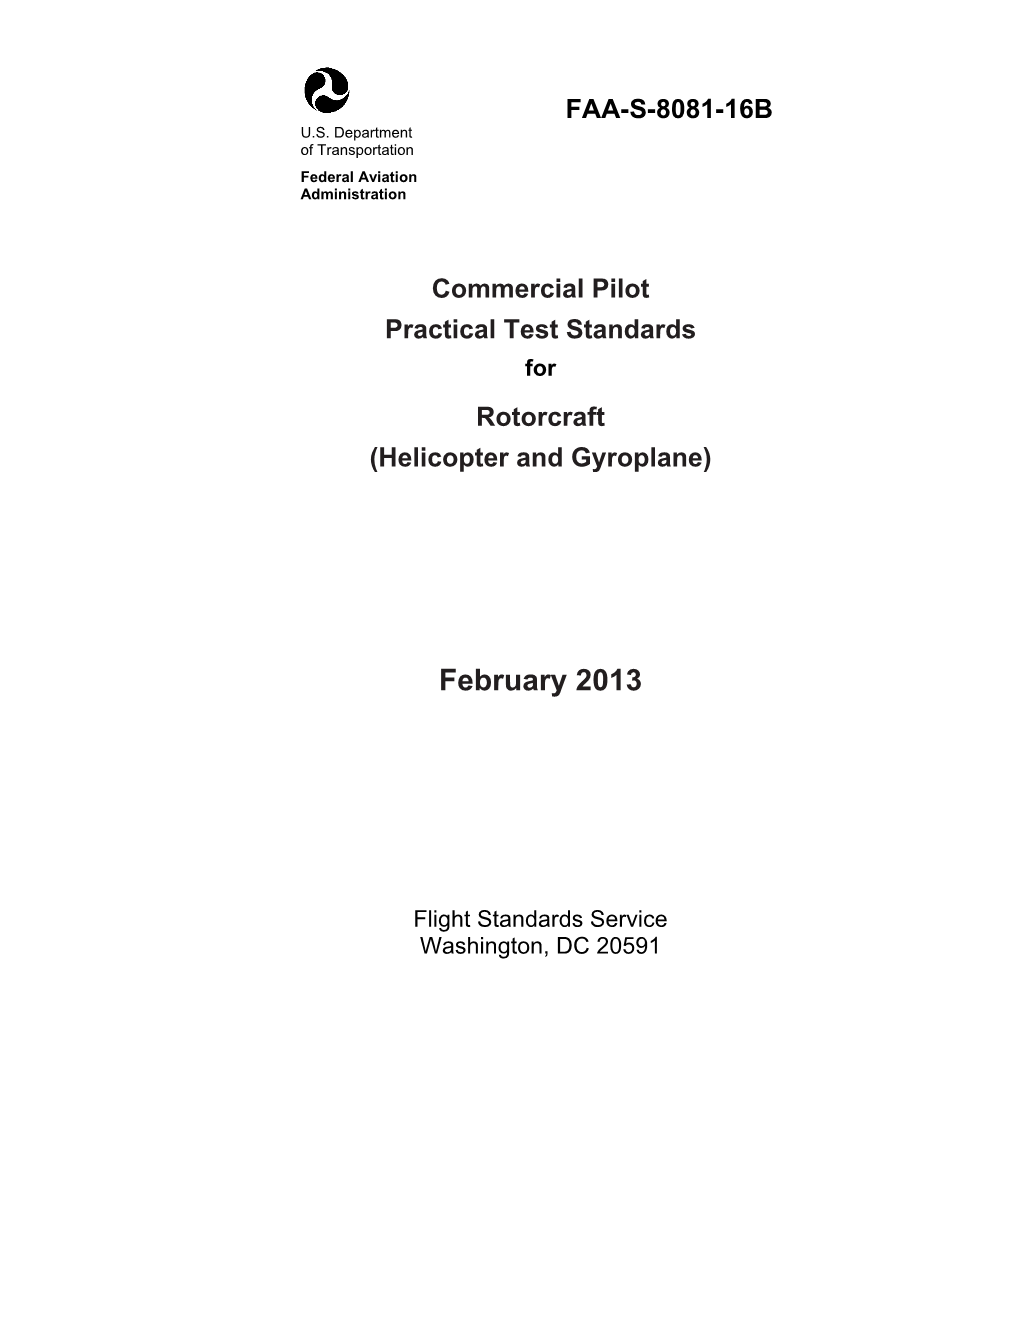 Commercial Pilot Practical Test Standards for Rotorcraft (Helicopter and Gyroplane)